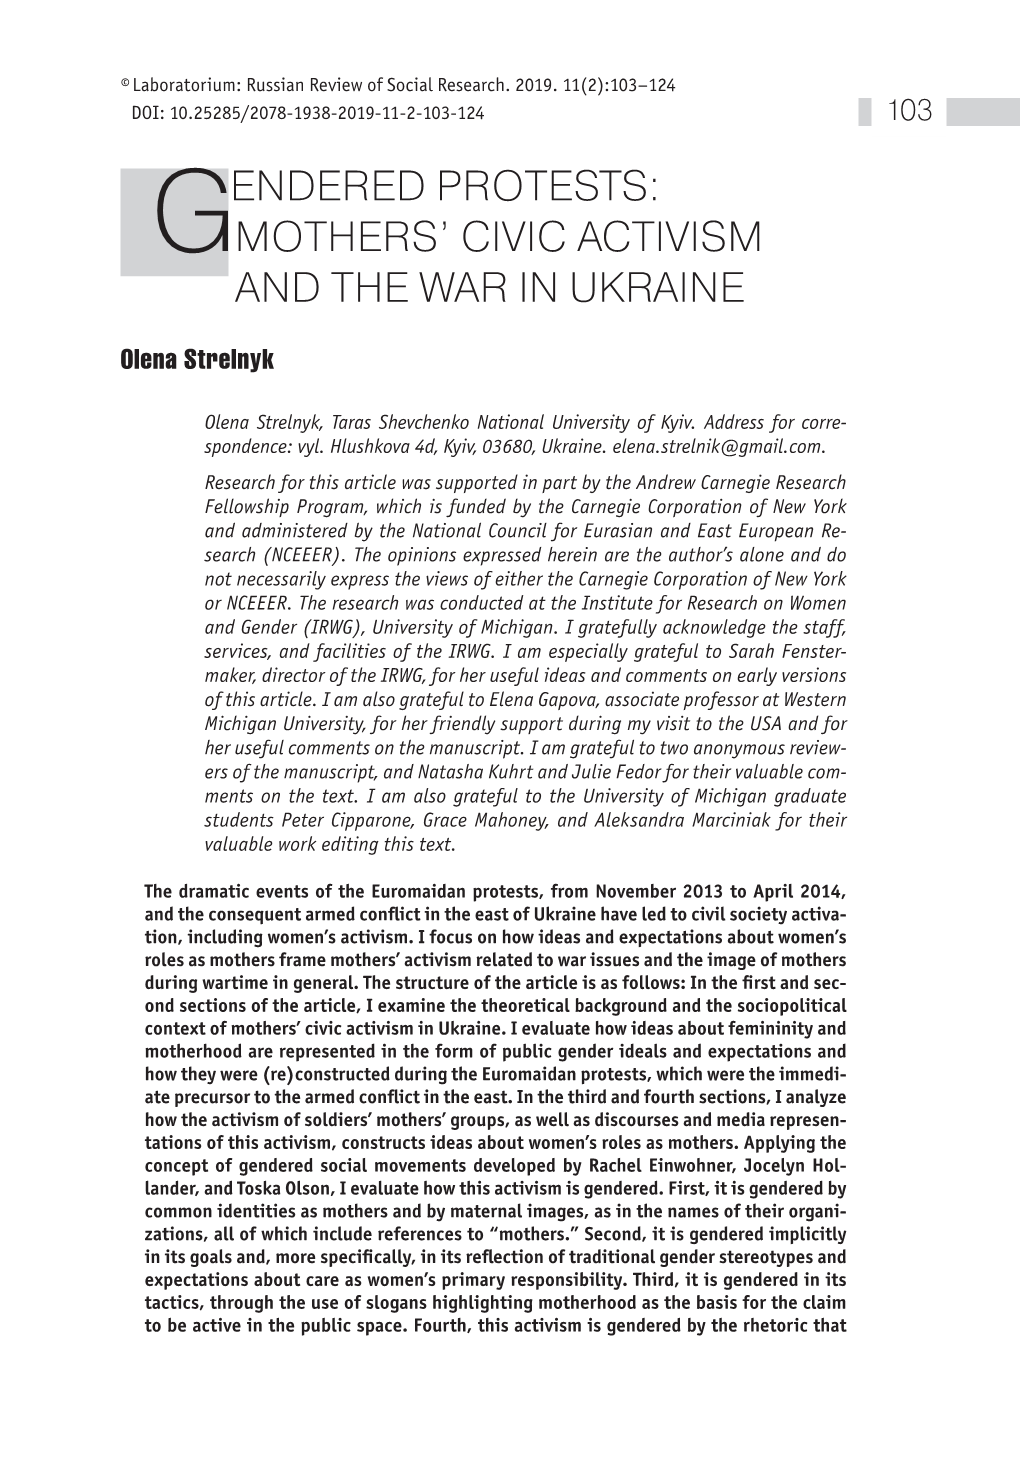 Gendered Protests: Mothers' Civic Activism and the War in Ukraine